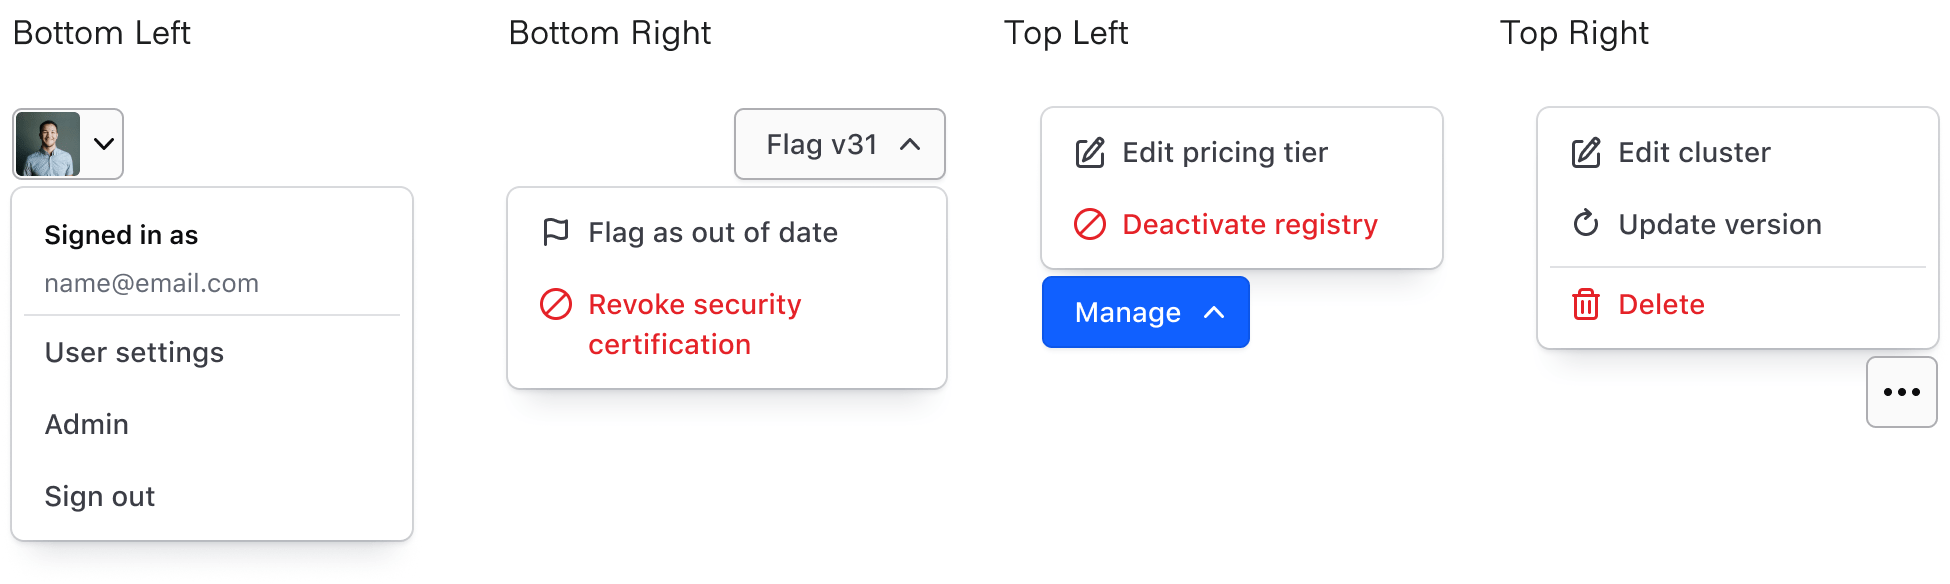 Dropdown list placement examples